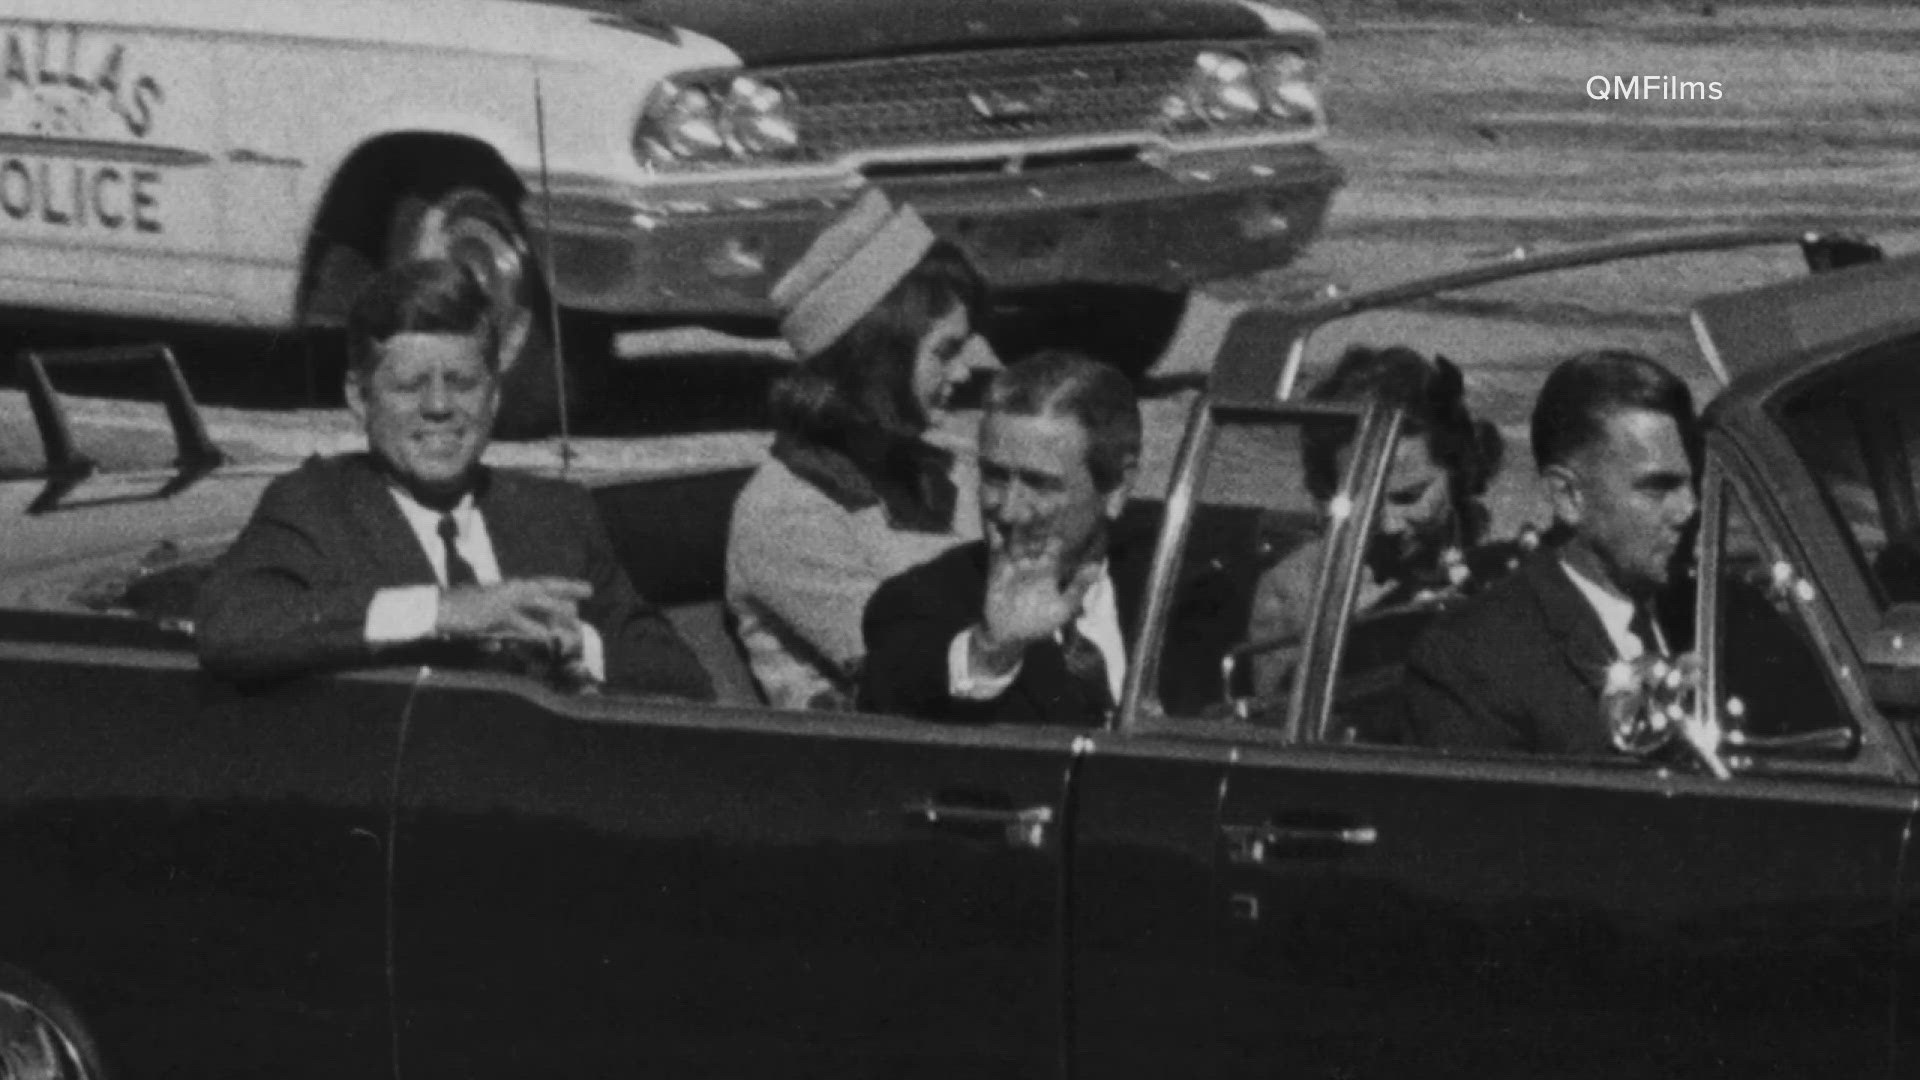 The fascination and questions about the Kennedy assassination still linger. A new documentary examines the atmosphere in Dallas leading up to that fateful day.